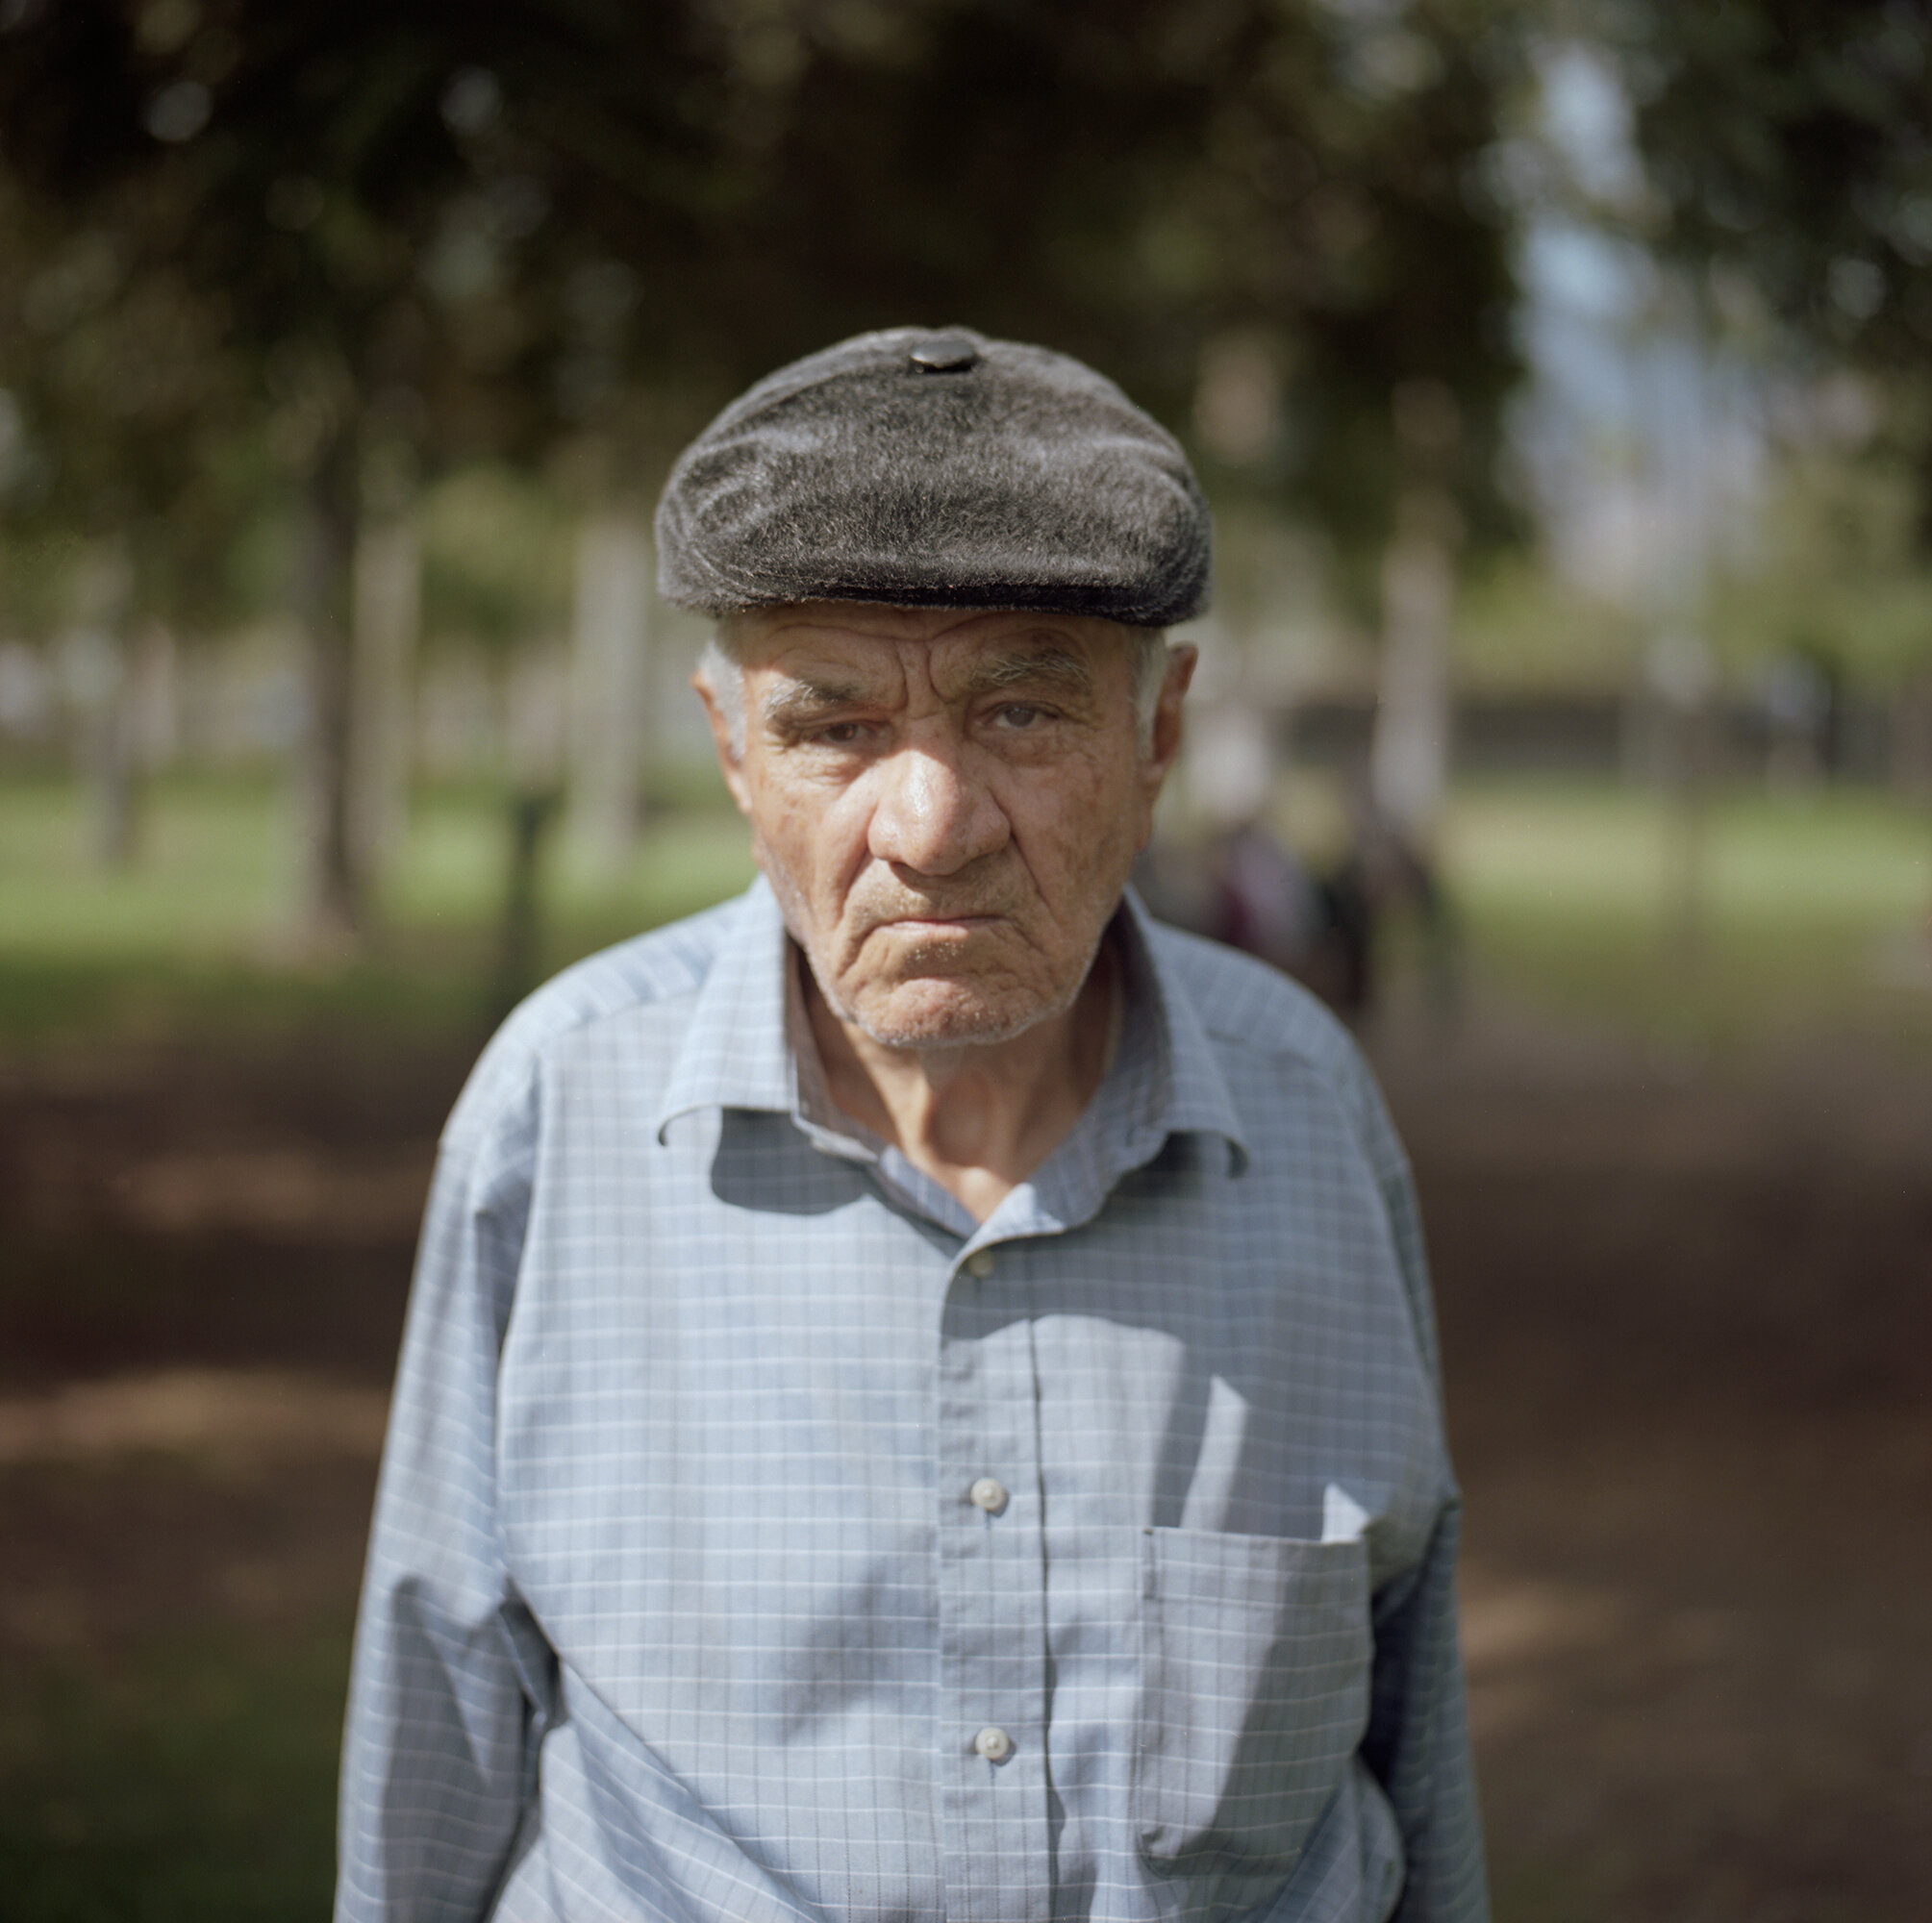  Azadour, an Iranian-Armenian immigrant, regularly visits Fremont Park in Glendale, California. The ethnic Armenian population of Glendale is only a few generations old, with the majority of the older individuals being the first-generation that immig